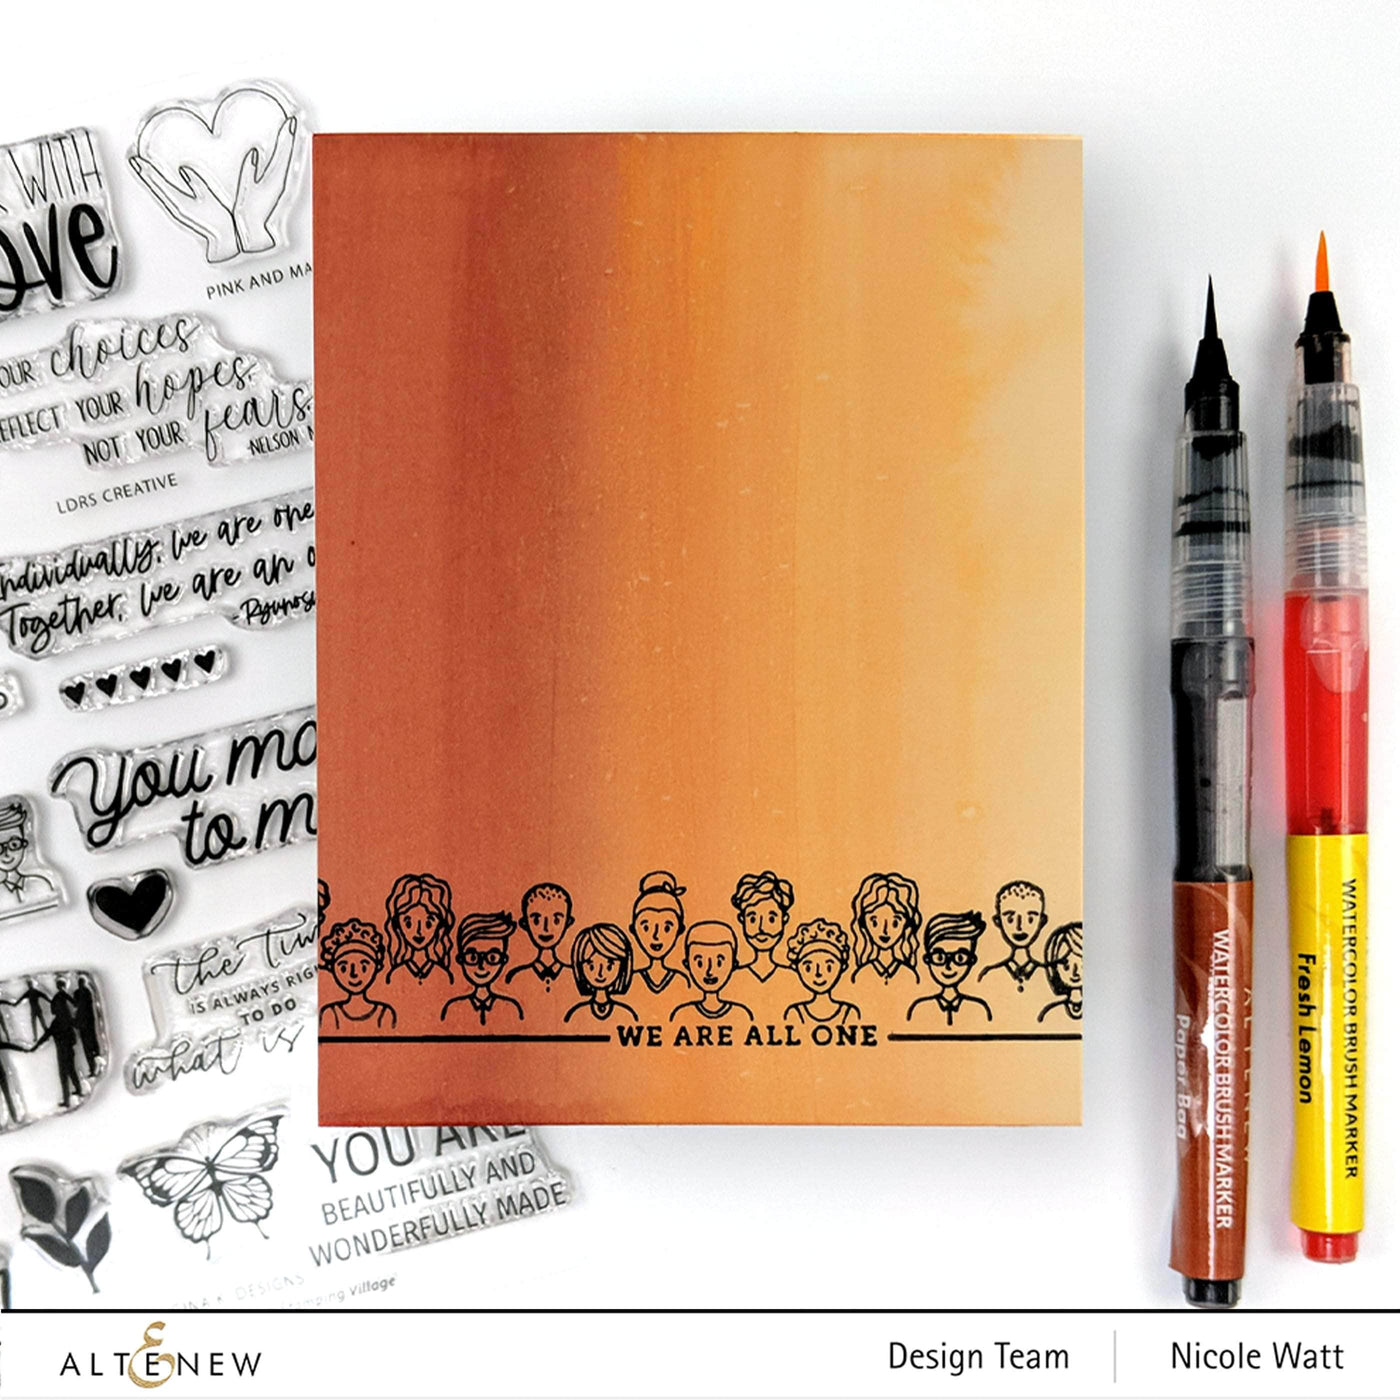 Photocentric Clear Stamps We Stand With You Stamp Set by the Stamping Village